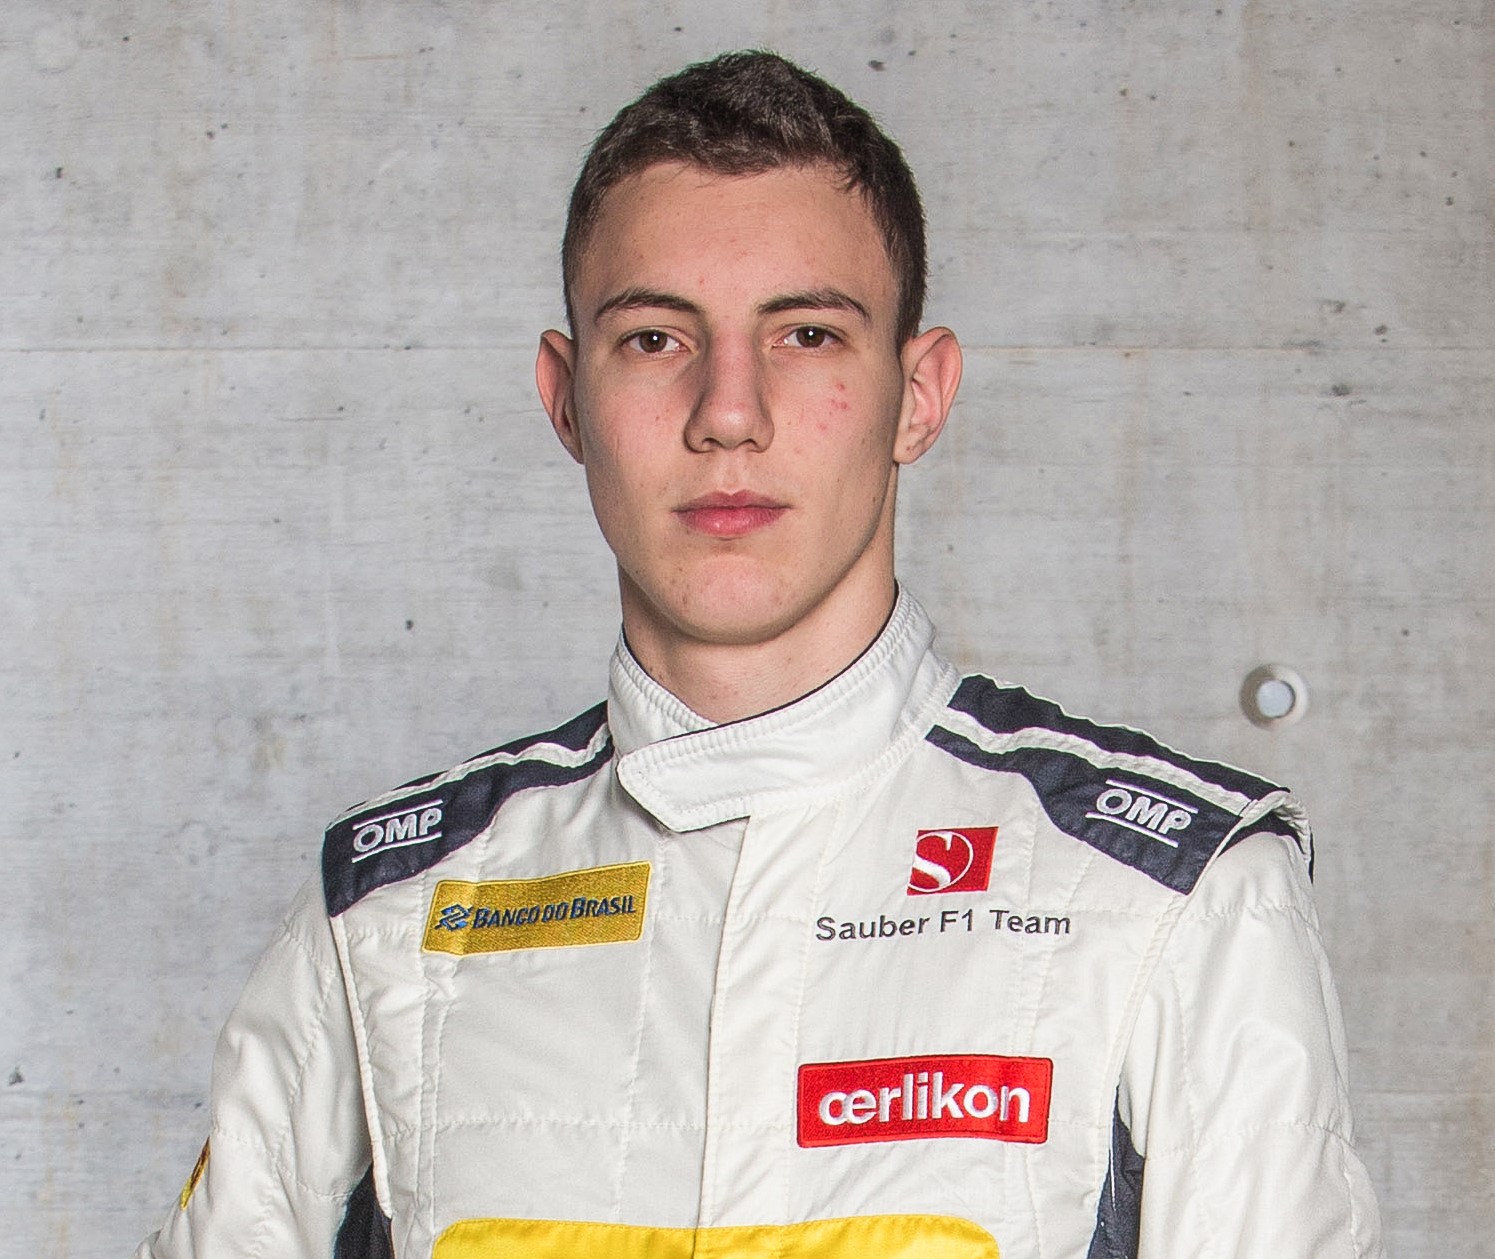 Marciello knows F1 is not a sport.  It's not a sport when the athlete has to buy his way onto the team.